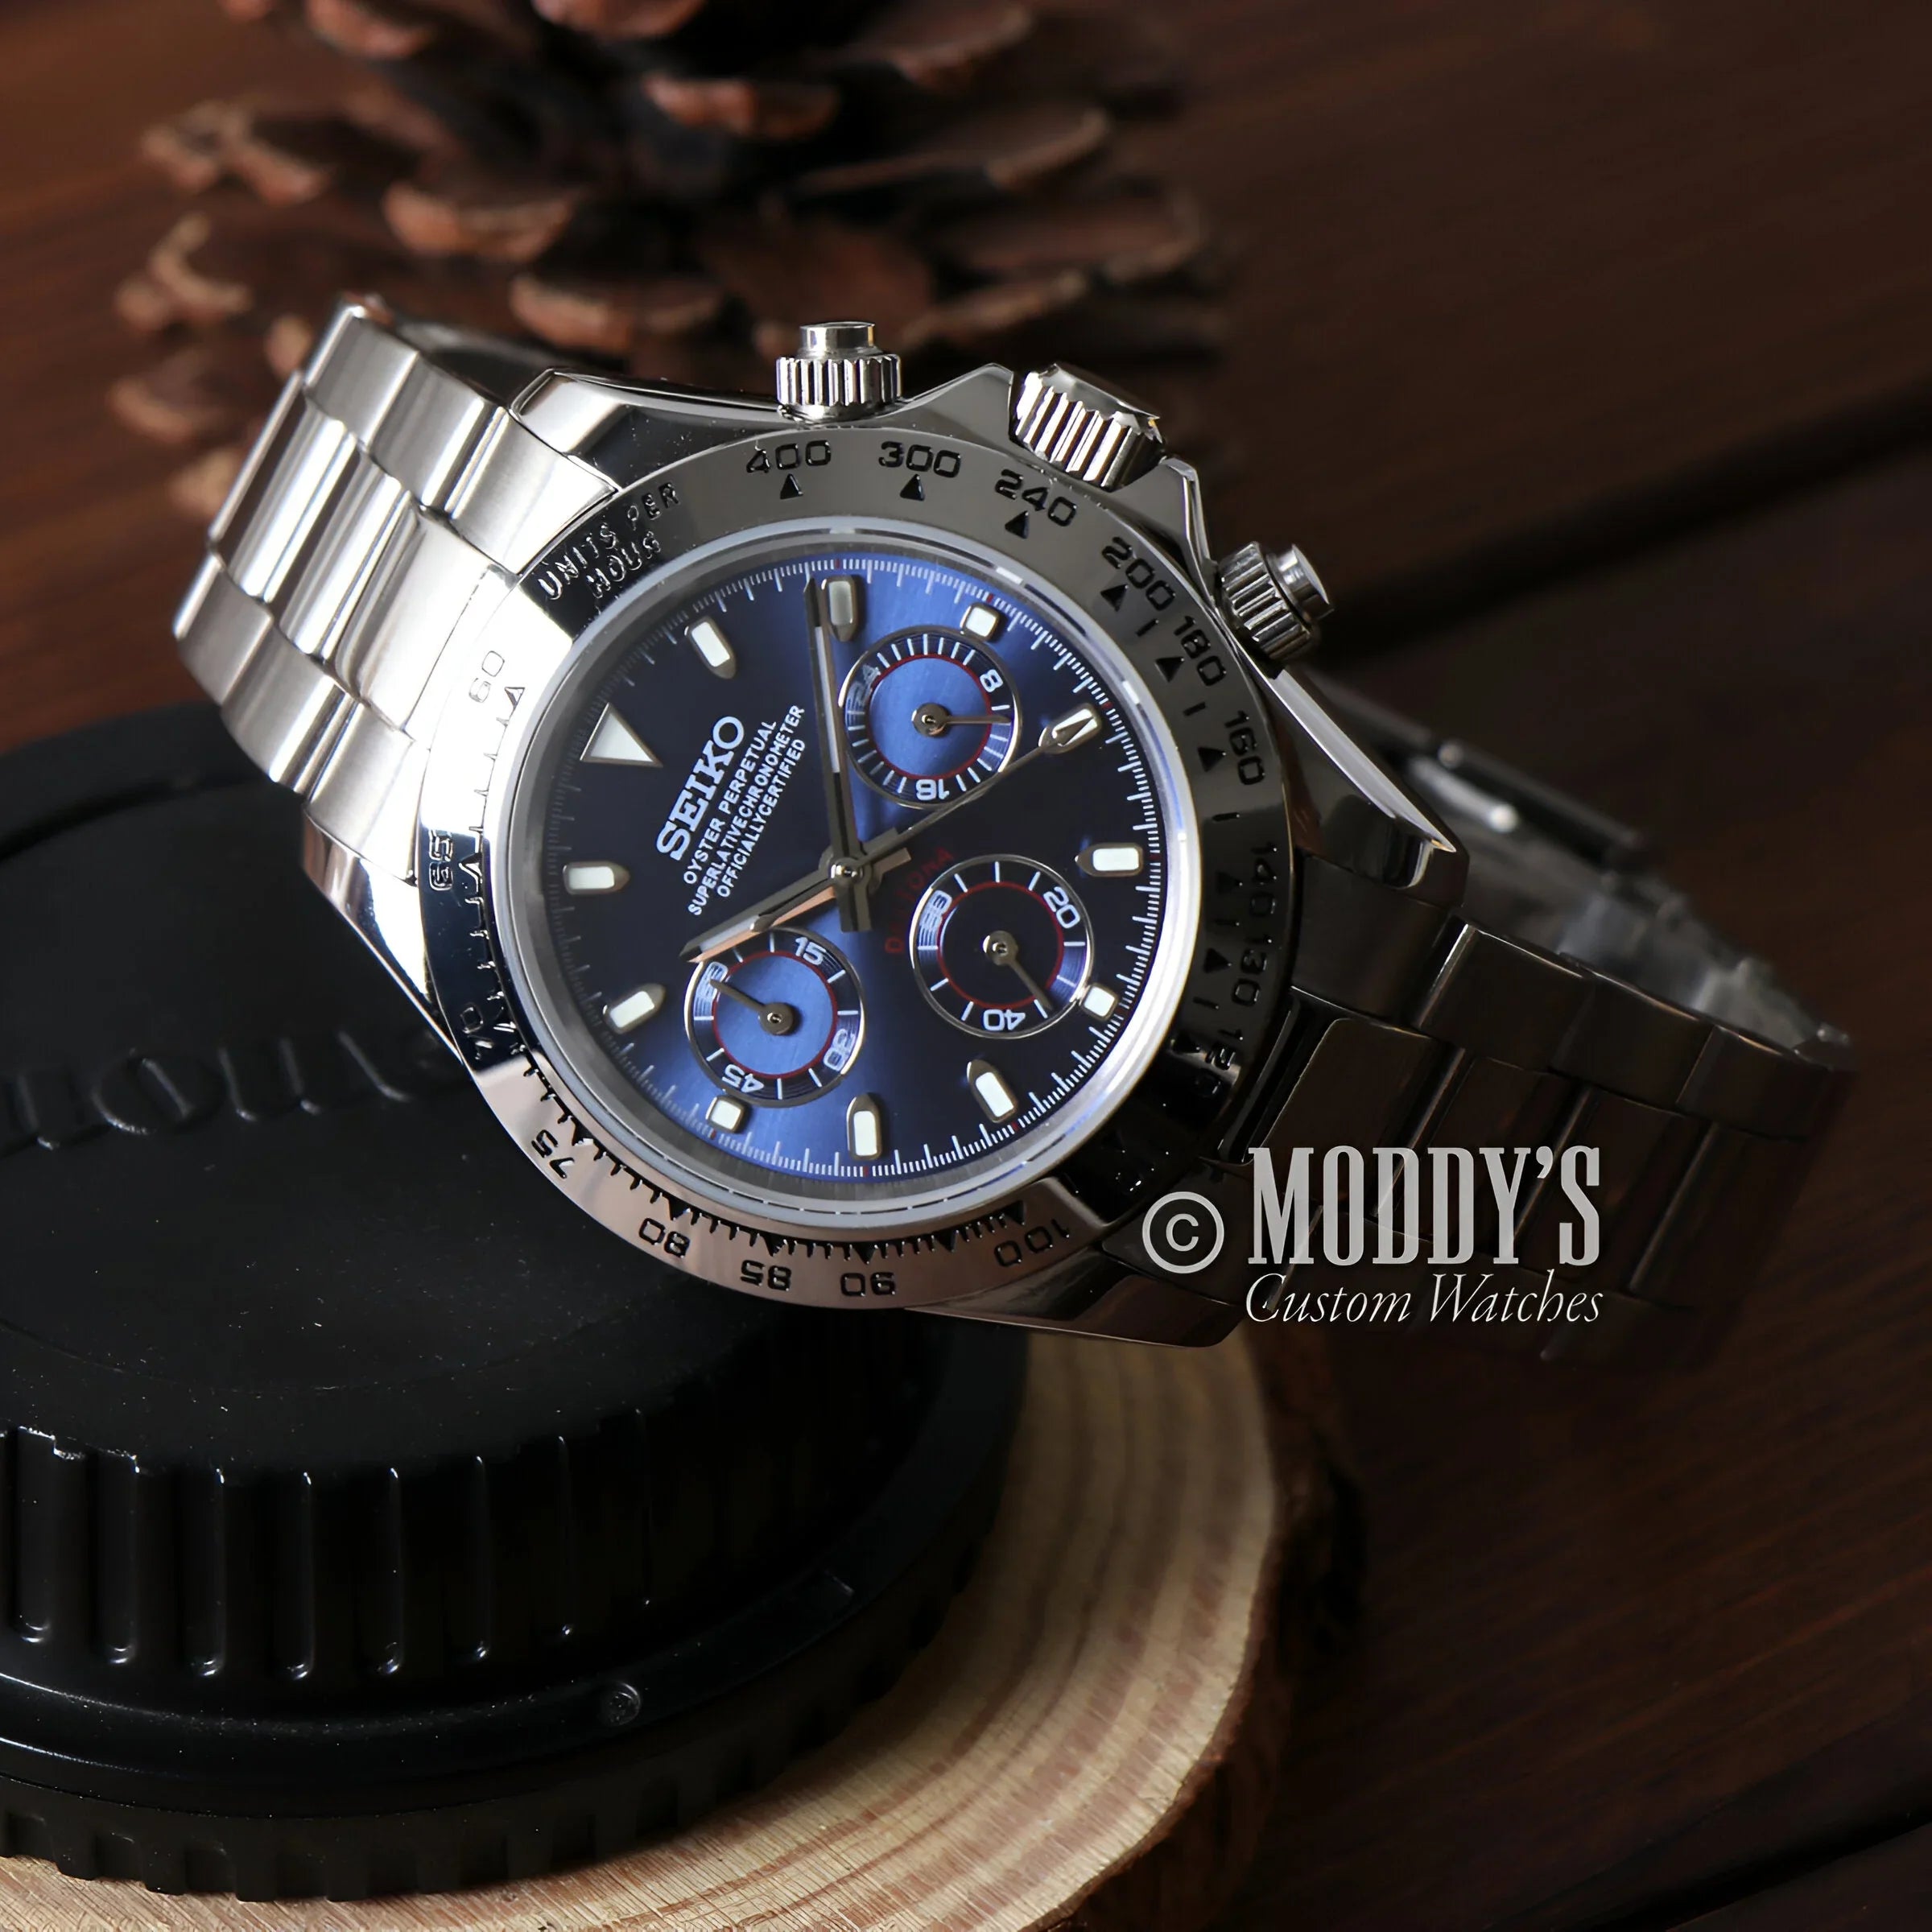 Seitona Silver-blue Hybrid Watch With Vk63 Movement On a Wooden Stand